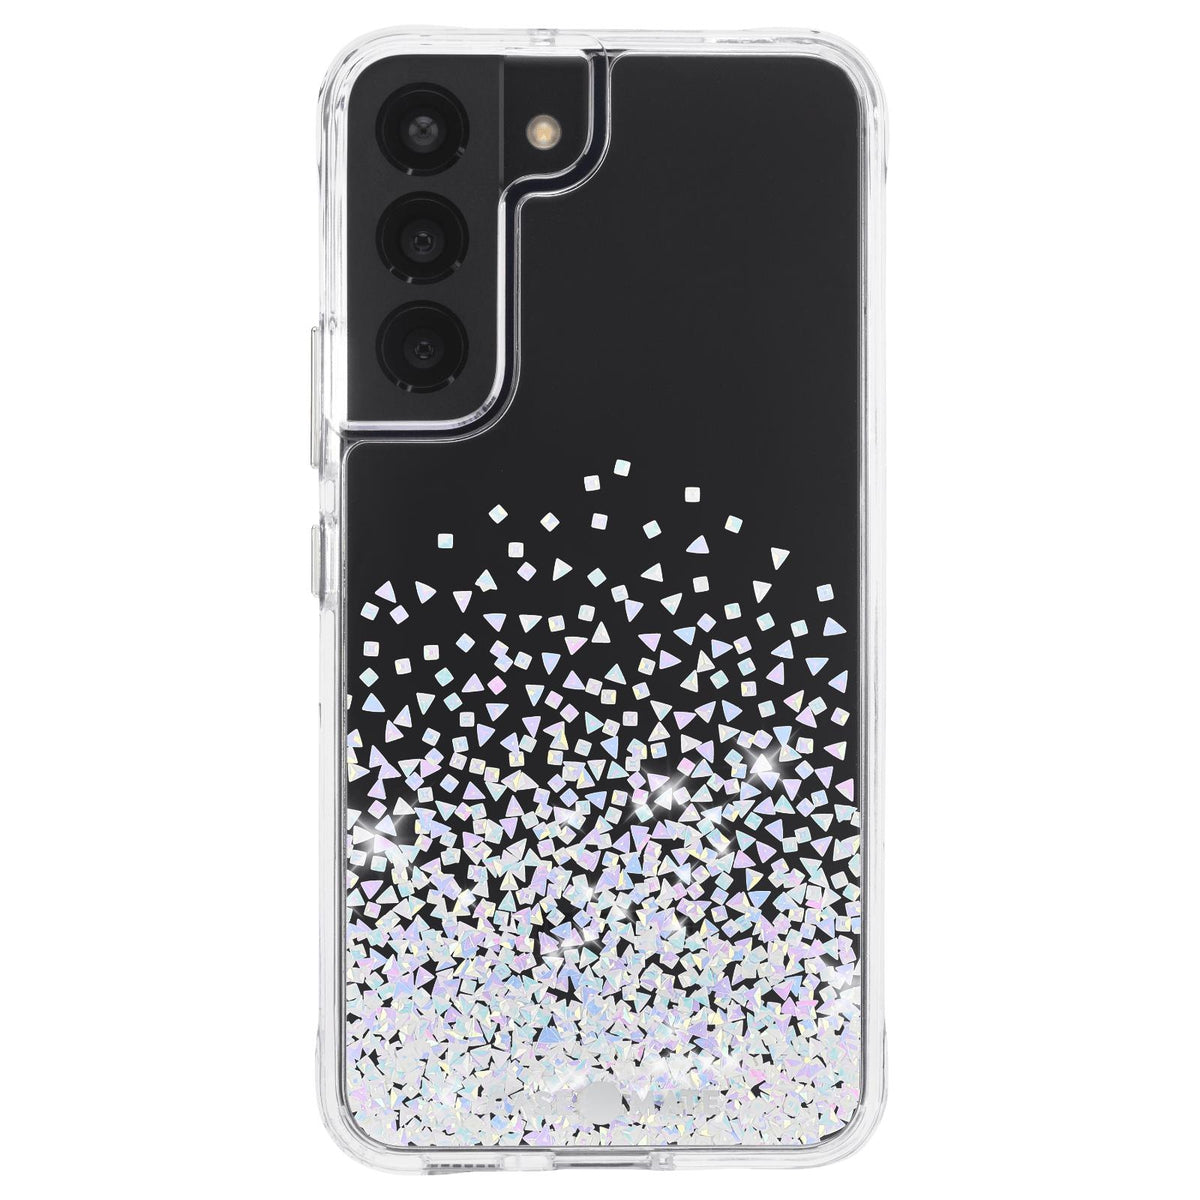 Case-Mate Twinkle Case for Apple iPhone 11 Pro / iPhone Xs / iPhone x - Gold